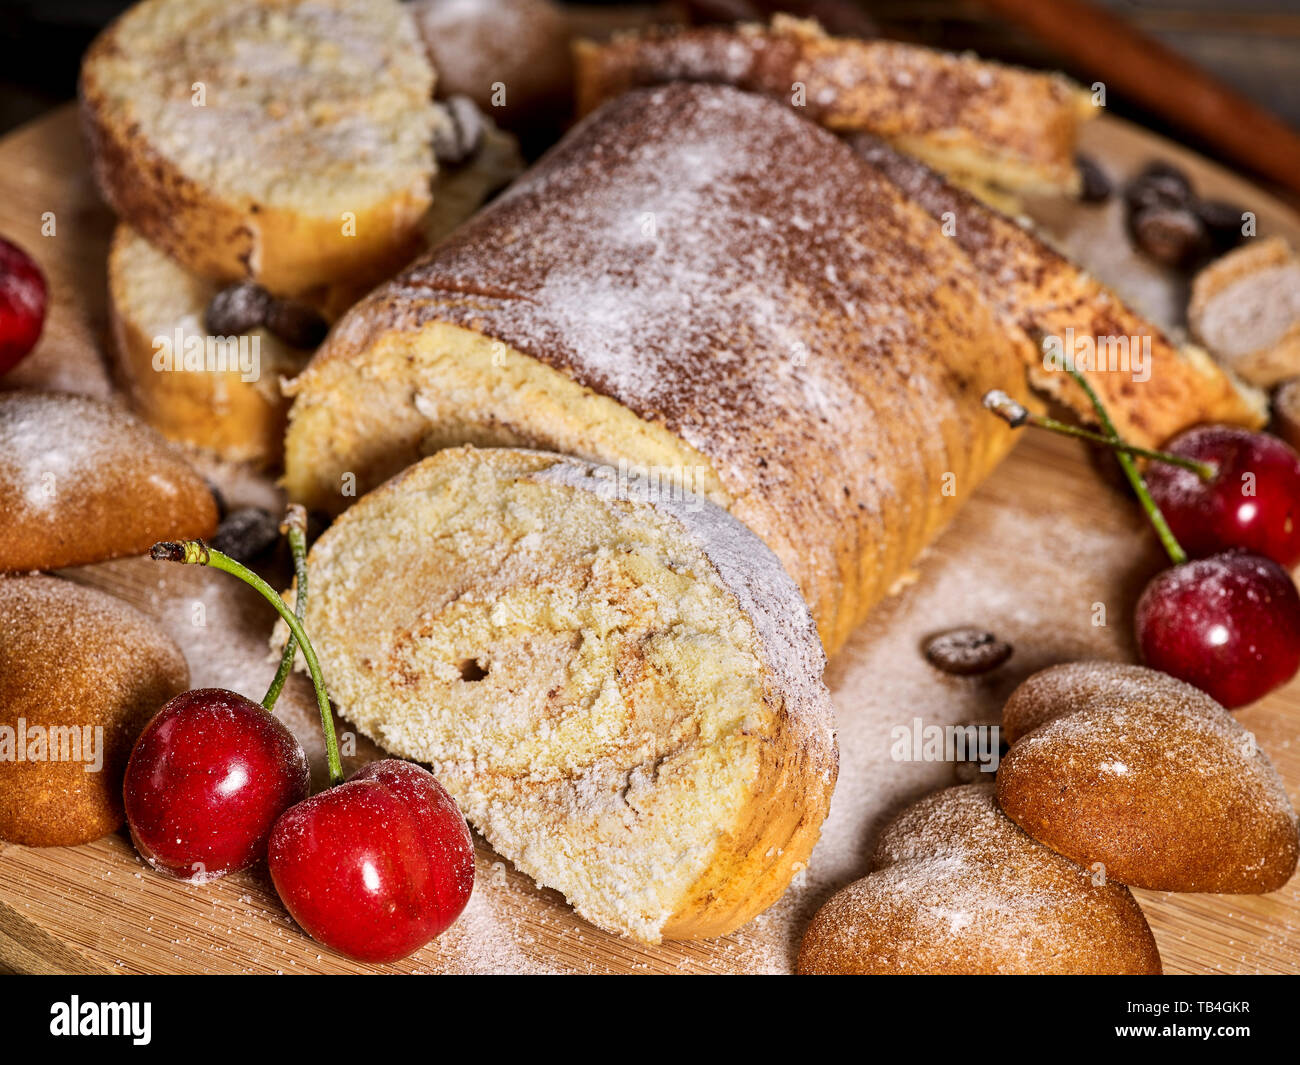 Cookies heart shape, sand rolled biscuit and cinnamon stick Stock Photo